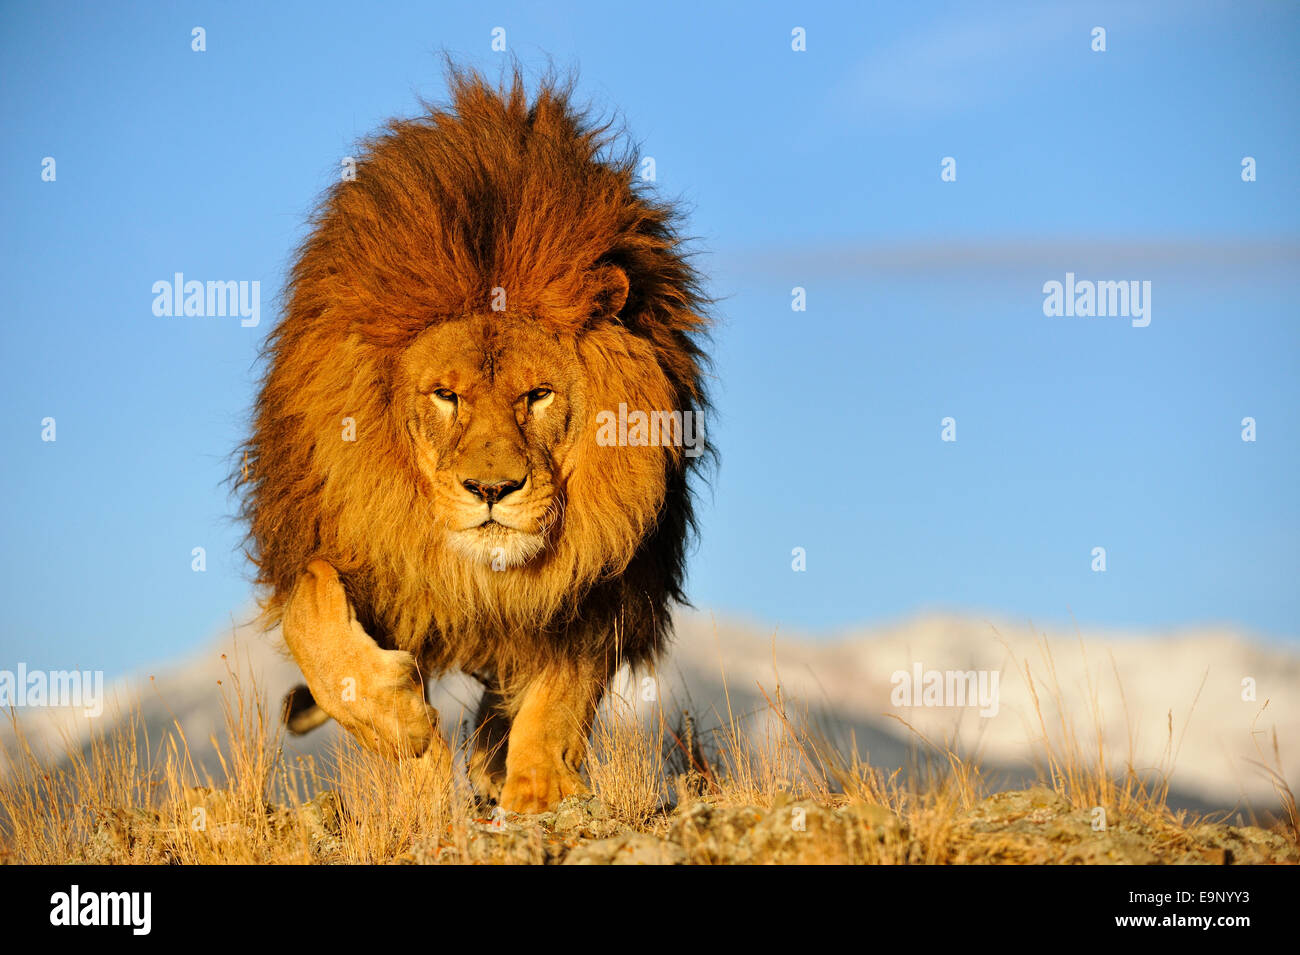 How many African lions are there in the wild?